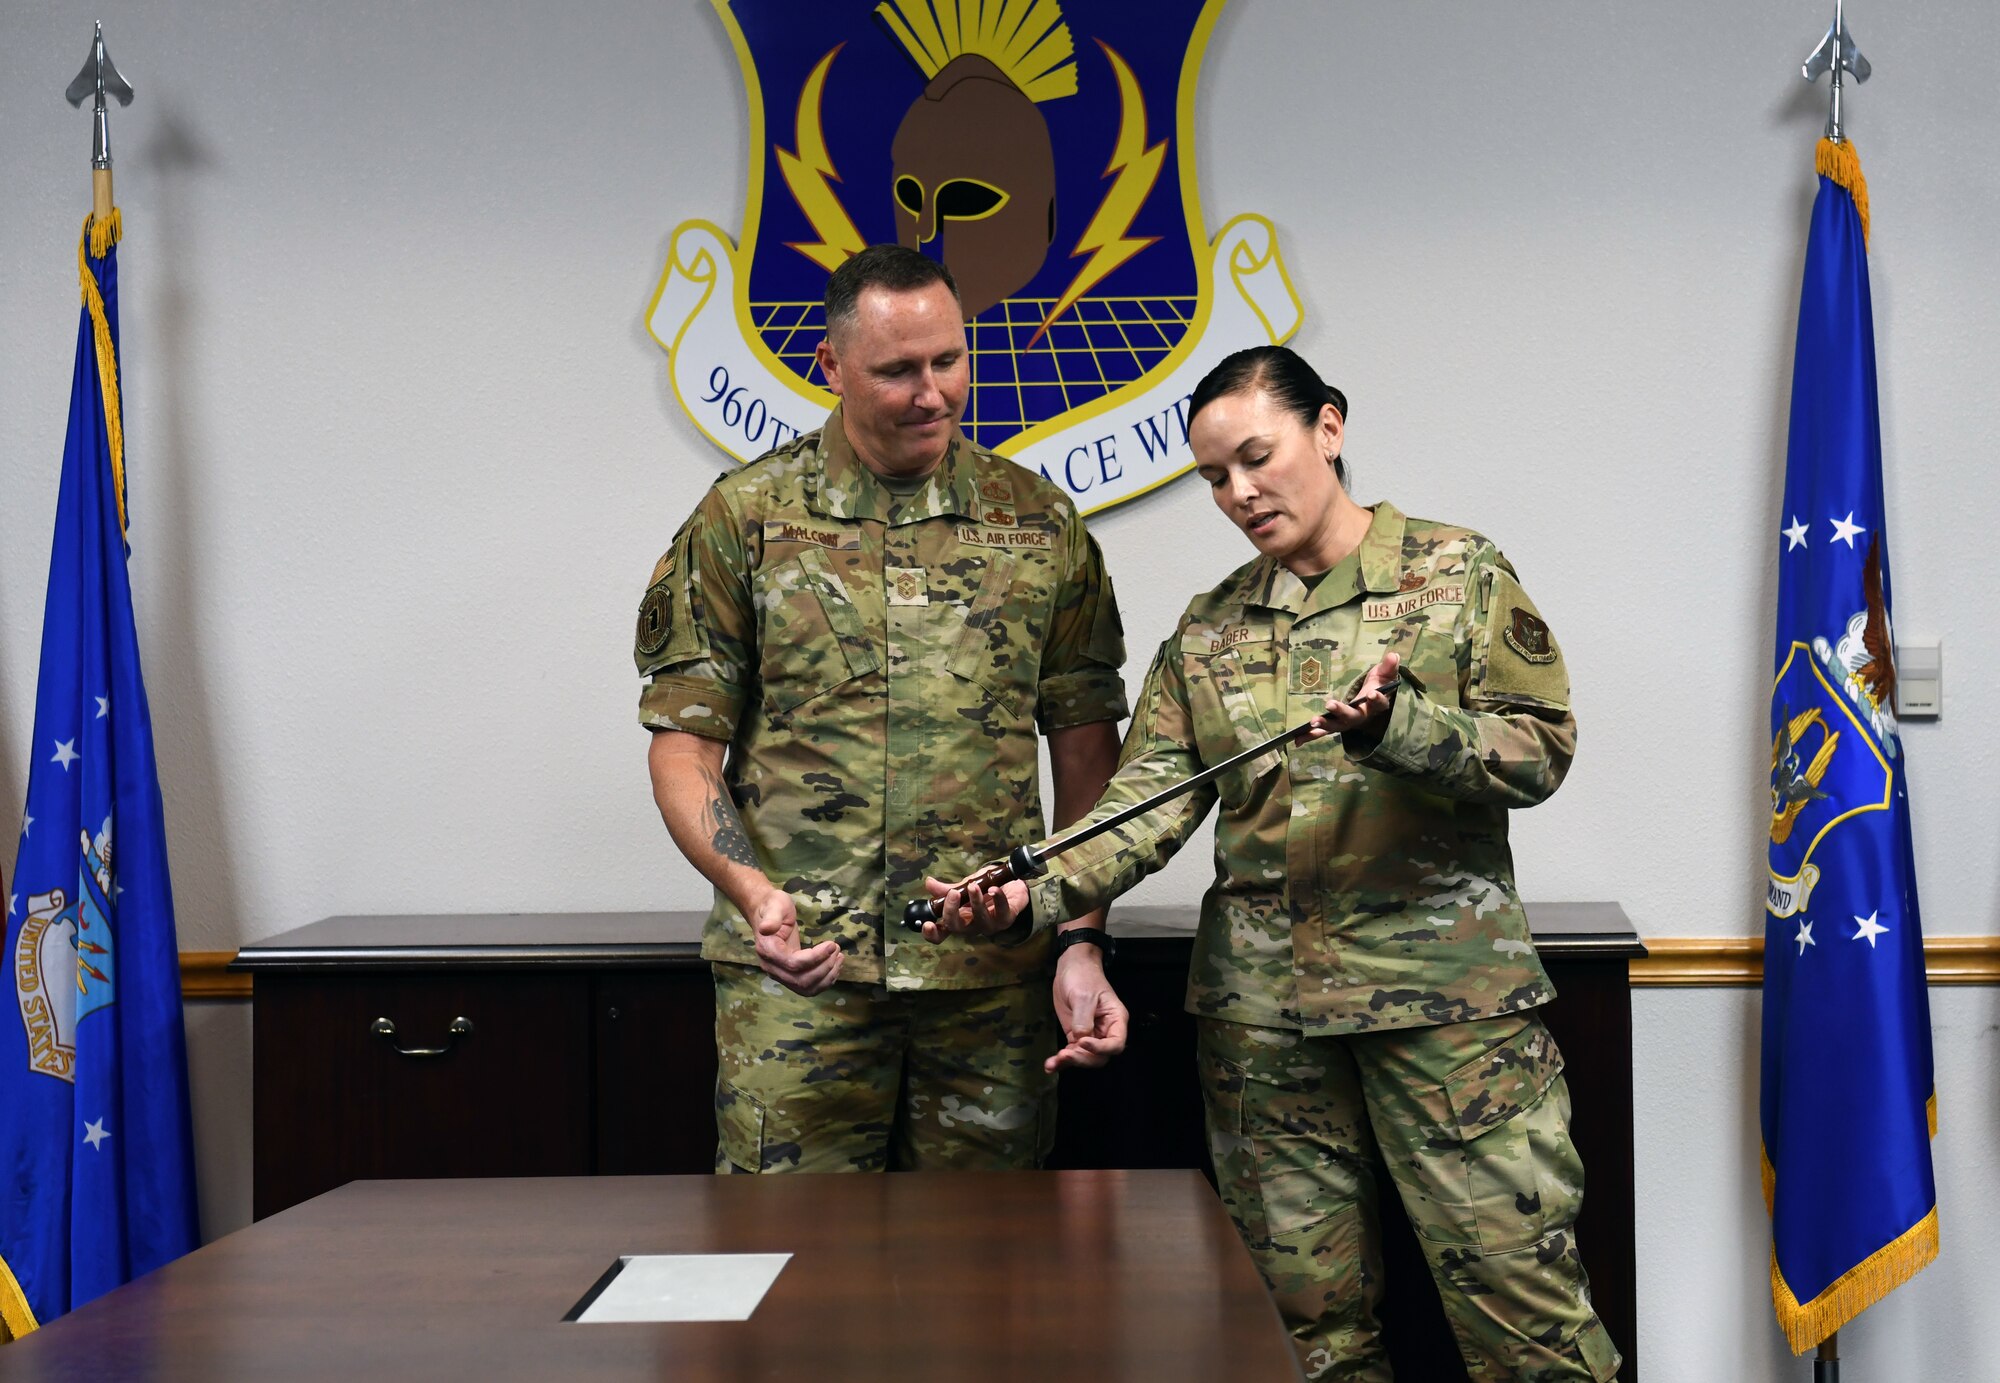 Chief Master Sgt. Billie M. Baber, 960th Cyberspace Wing command chief (left), presents a gladiator rudis to Chief Master Sgt. Jeremy N. Malcolm, 10th Air Force command chief, April 2, 2022, at Joint Base San Antonio-Chapman Training Annex, Texas. The rudis was a retirement gift to Malcolm. (U.S. Air Force photo by Kristian Carter)